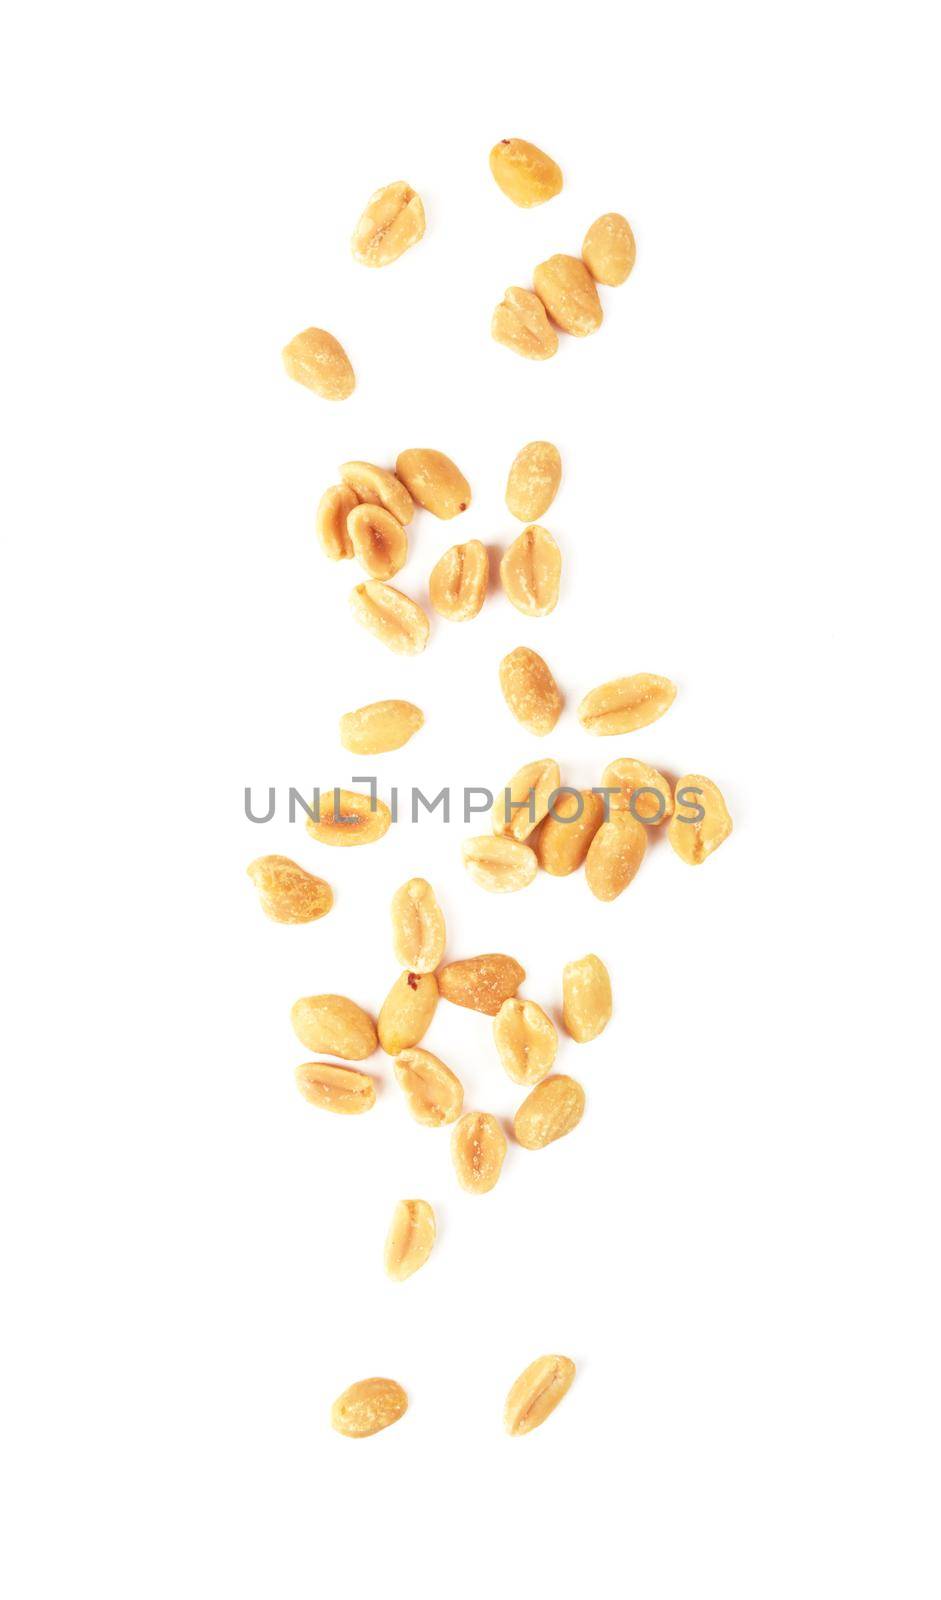 Salted peanuts isolated on a white background